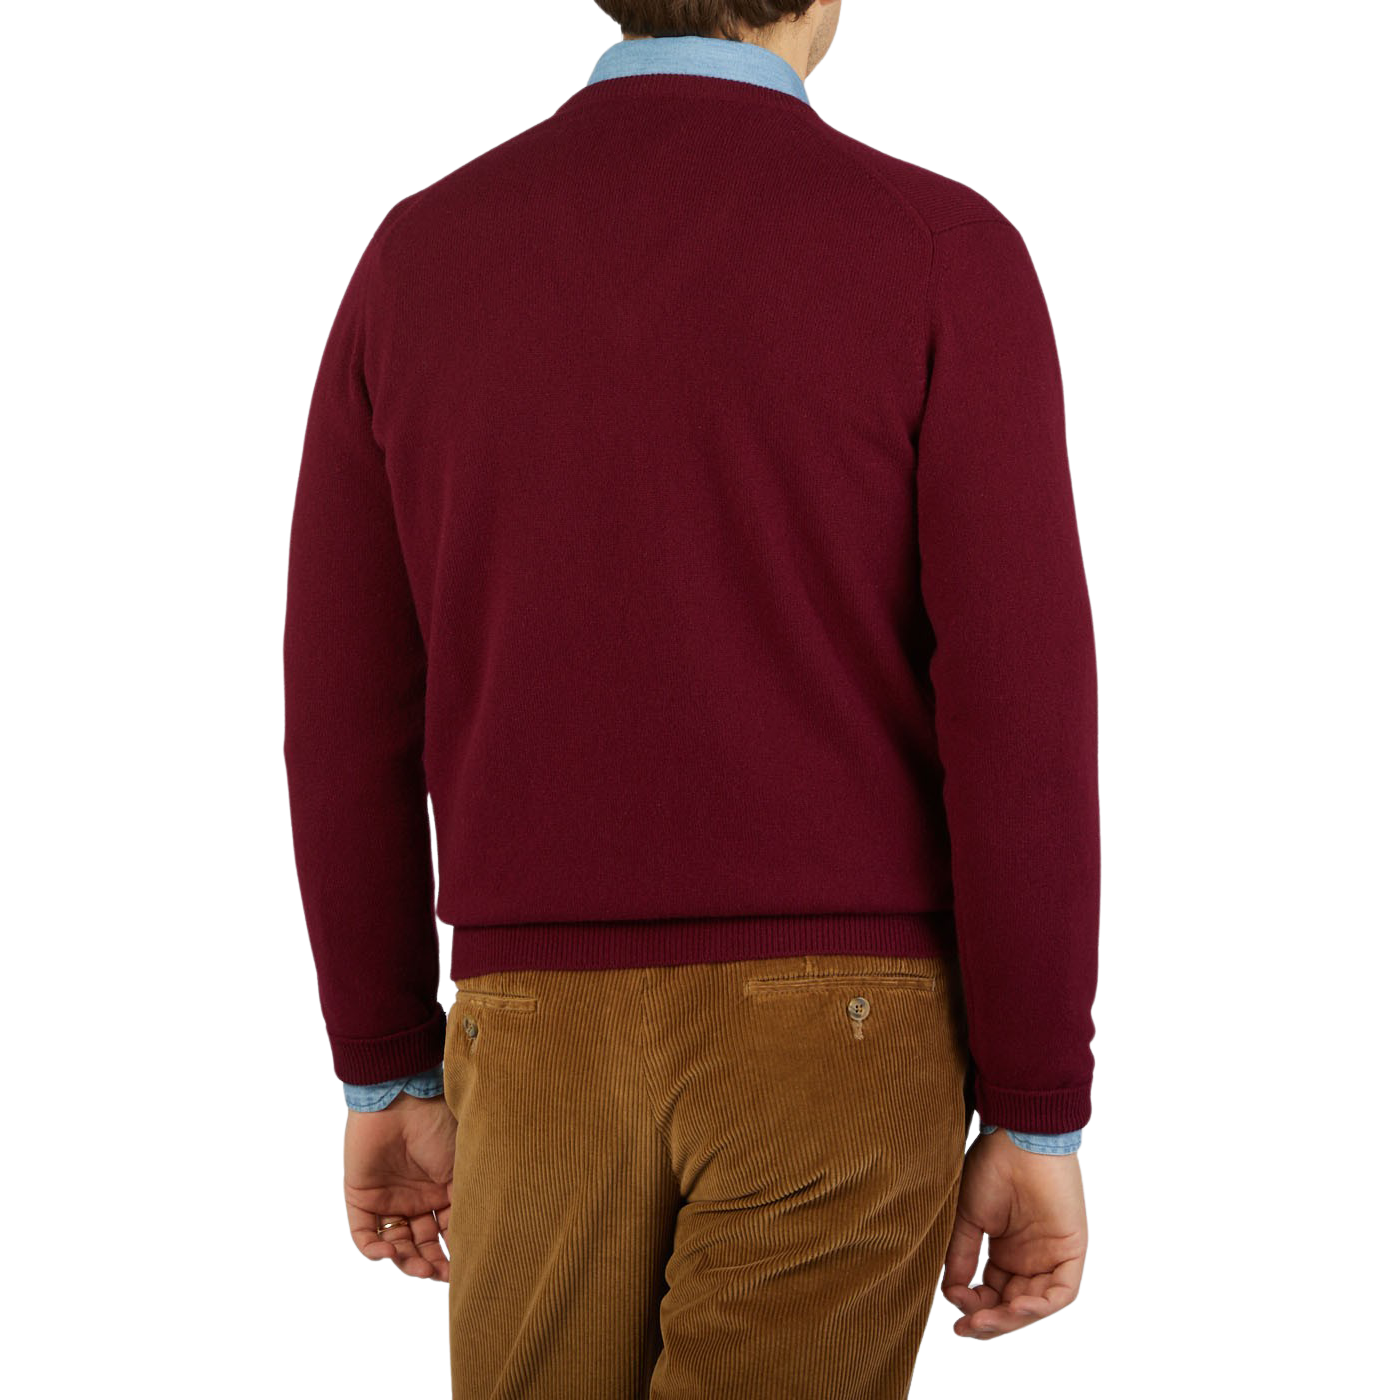 The back view of a man wearing a William Lockie Bordeaux V-Neck Lambswool Sweater.